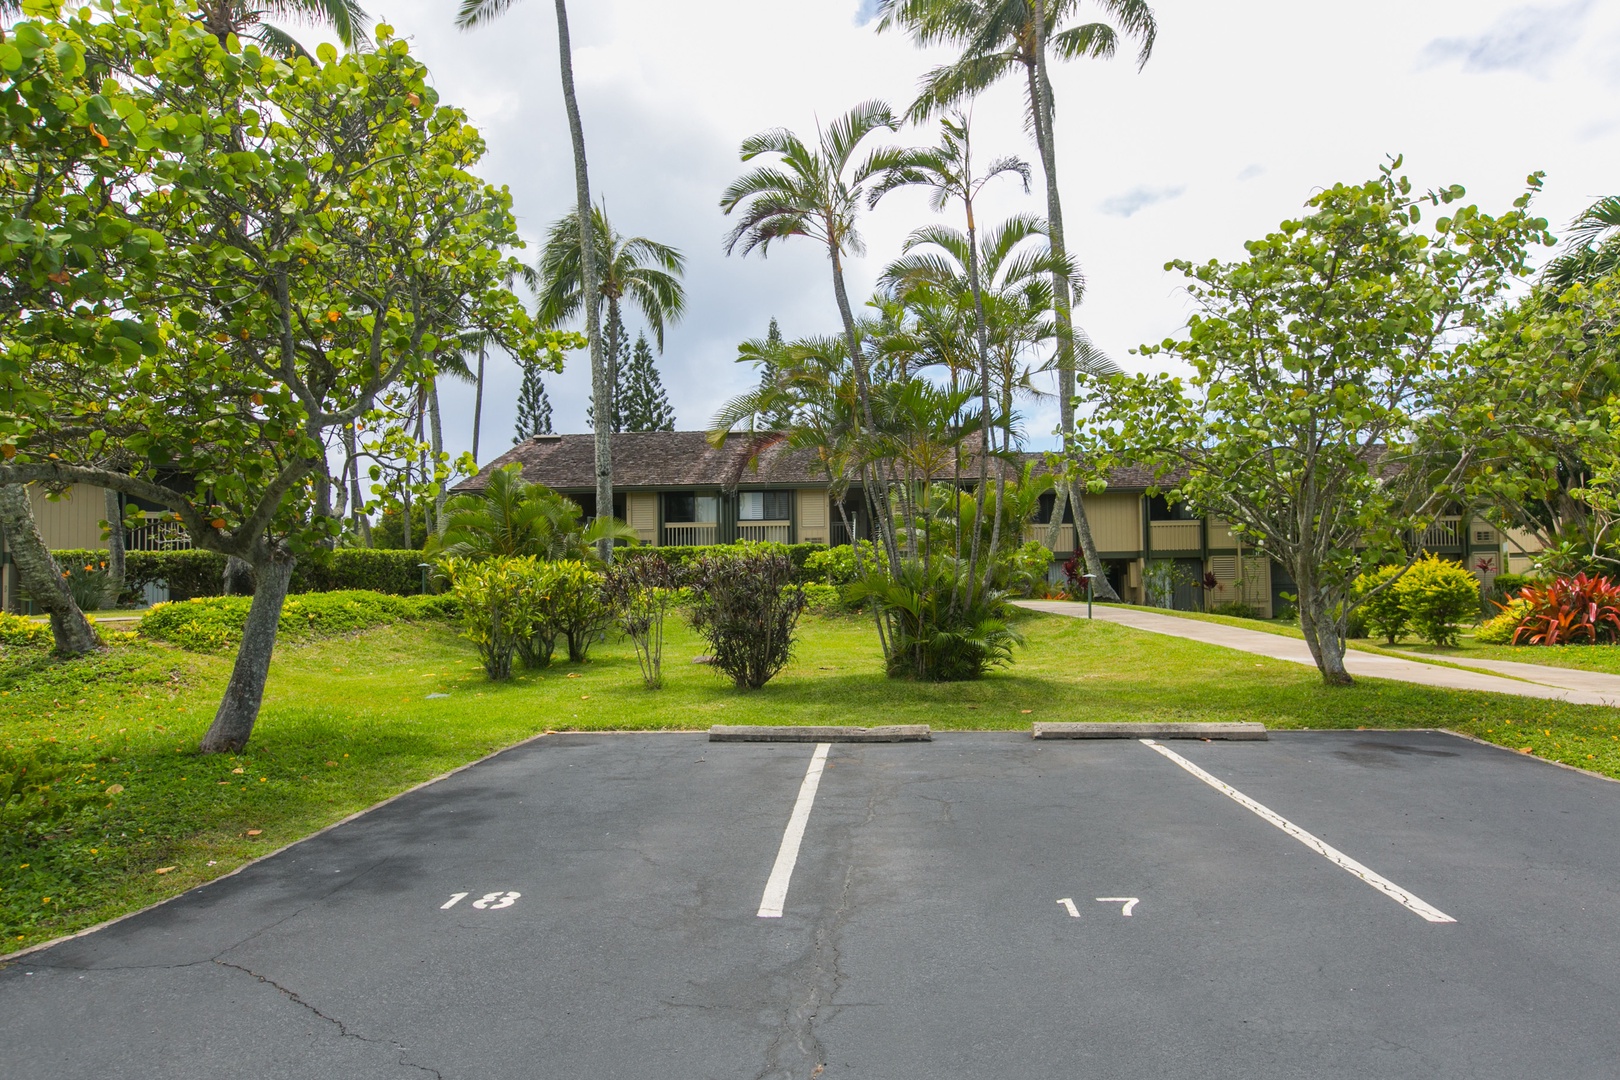 Kahuku Vacation Rentals, Ilima West Kuilima Estates #18 at Turtle Bay - Secure your vehicle in our designated parking stall, a safe and convenient spot tailored for your ease